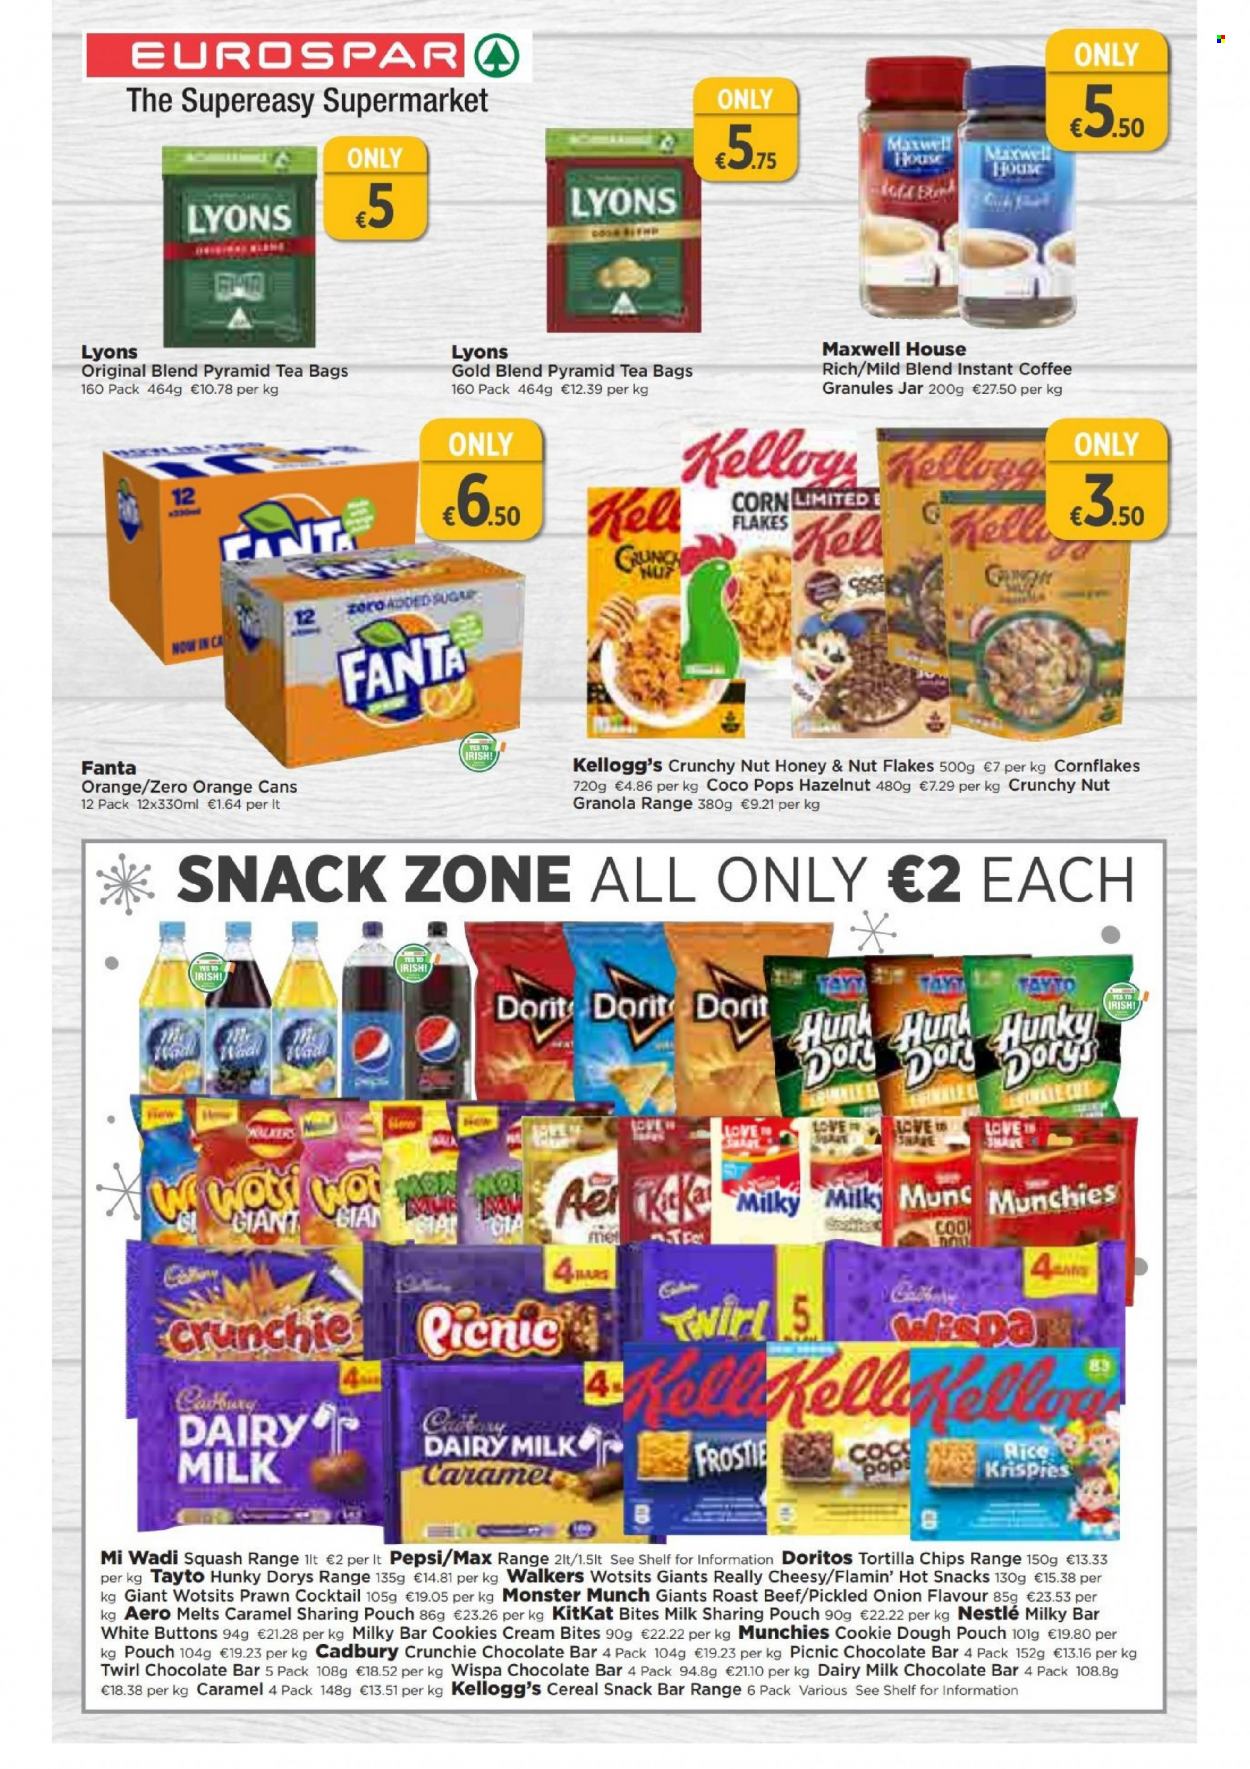 thumbnail - EUROSPAR offer  - 10.11.2022 - 30.11.2022 - Sales products - corn, oranges, prawns, cookie dough, cookies, milk chocolate, Nestlé, snack, KitKat, Monster Munch, Kellogg's, Cadbury, Milkybar, Dairy Milk, snack bar, chocolate bar, Doritos, tortilla chips, chips, Tayto, cereals, granola, corn flakes, coco pops, rice pops, rice, caramel, honey, Pepsi, Fanta, Monster, Maxwell House, tea bags, Lyons, instant coffee, beef meat, roast beef, jar. Page 10.